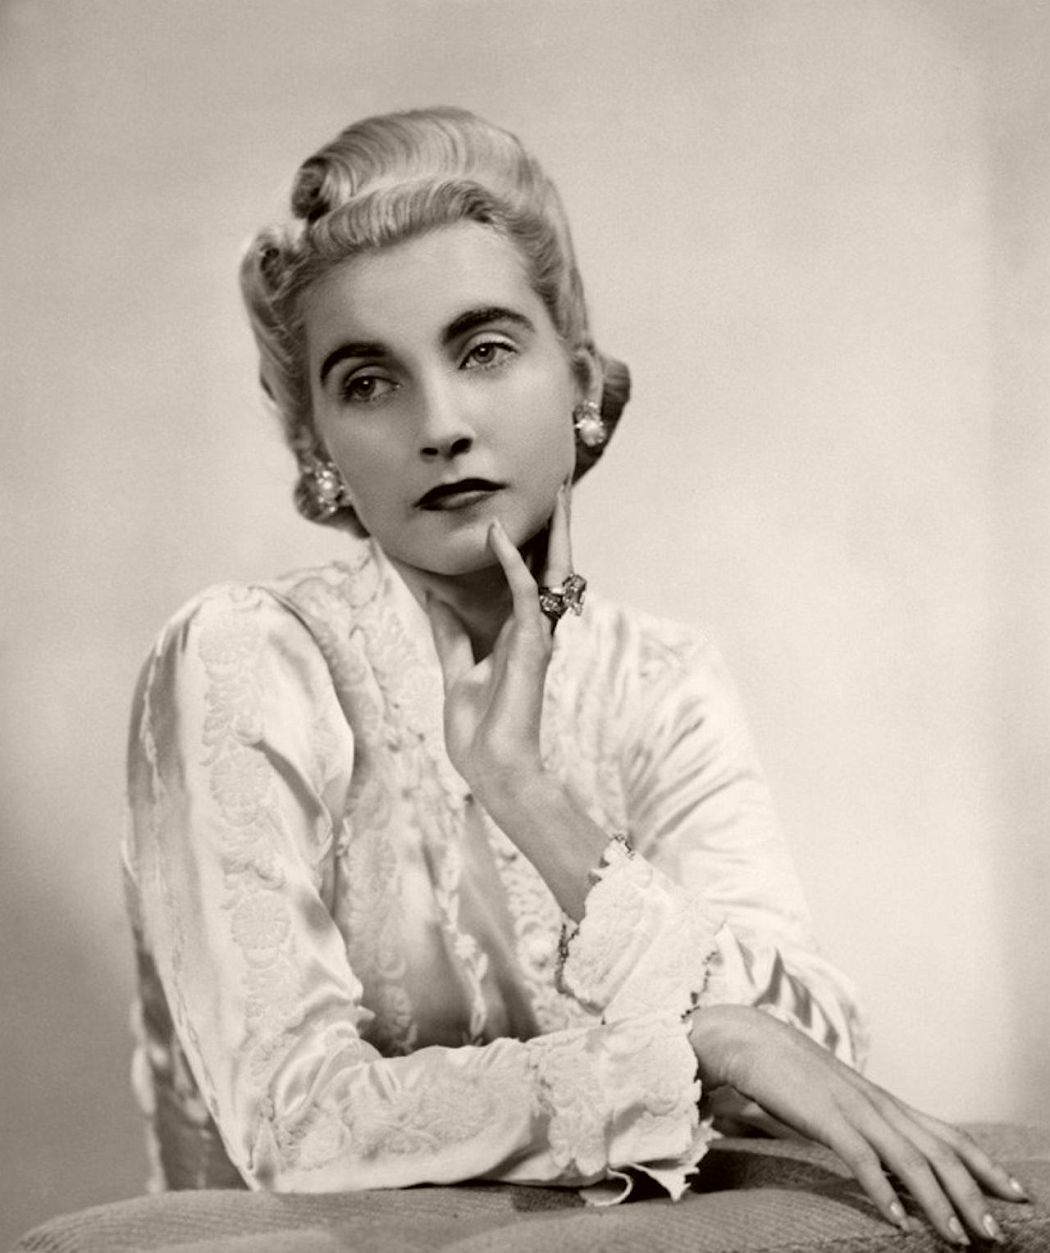 A 1930s fashion icon and the heiress of the Woolworth’s fortune, Barbara Hutton was the latter day social scene Queen, travelling the world to attend lavish parties and dubbed the ‘poor little rich girl’ after hosting an expensive debutante ball amid the Great Depression. With an intense passion and fascination for jewellery, Barbara’s collection rather than her wealth was what she left behind, with her vast collection spanning jade necklaces, Cartier pieces and a pearl necklace previously owned by Marie Antoinette. A collection any jewellery enthusiast would envy.